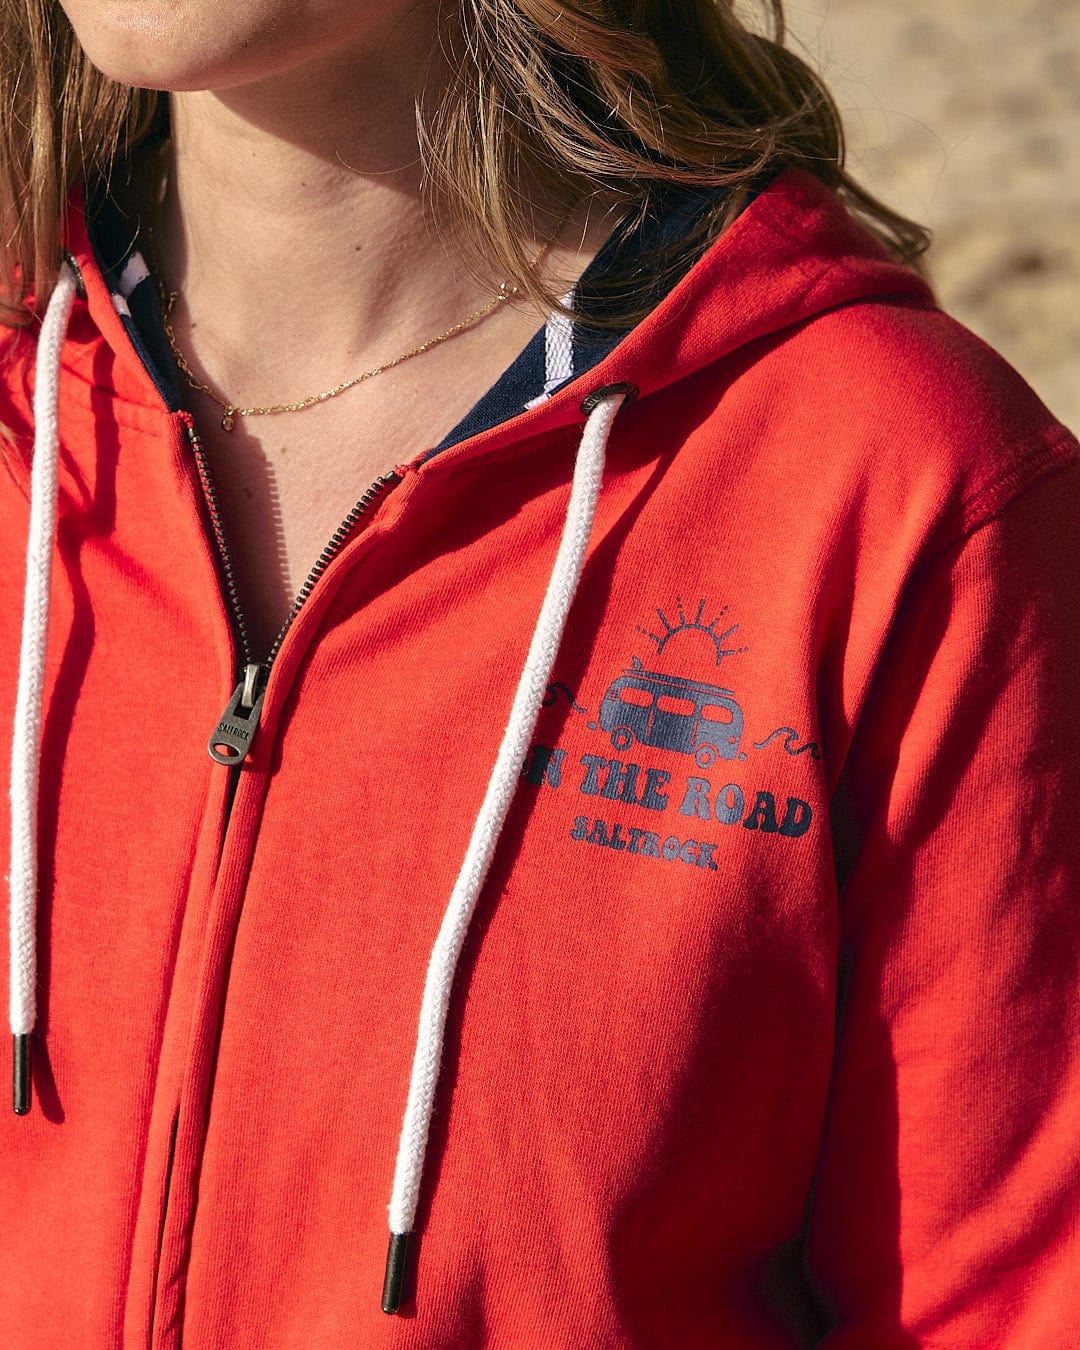 A woman wearing a Saltrock red On The Road - Womens Zip Hoodie on the beach.